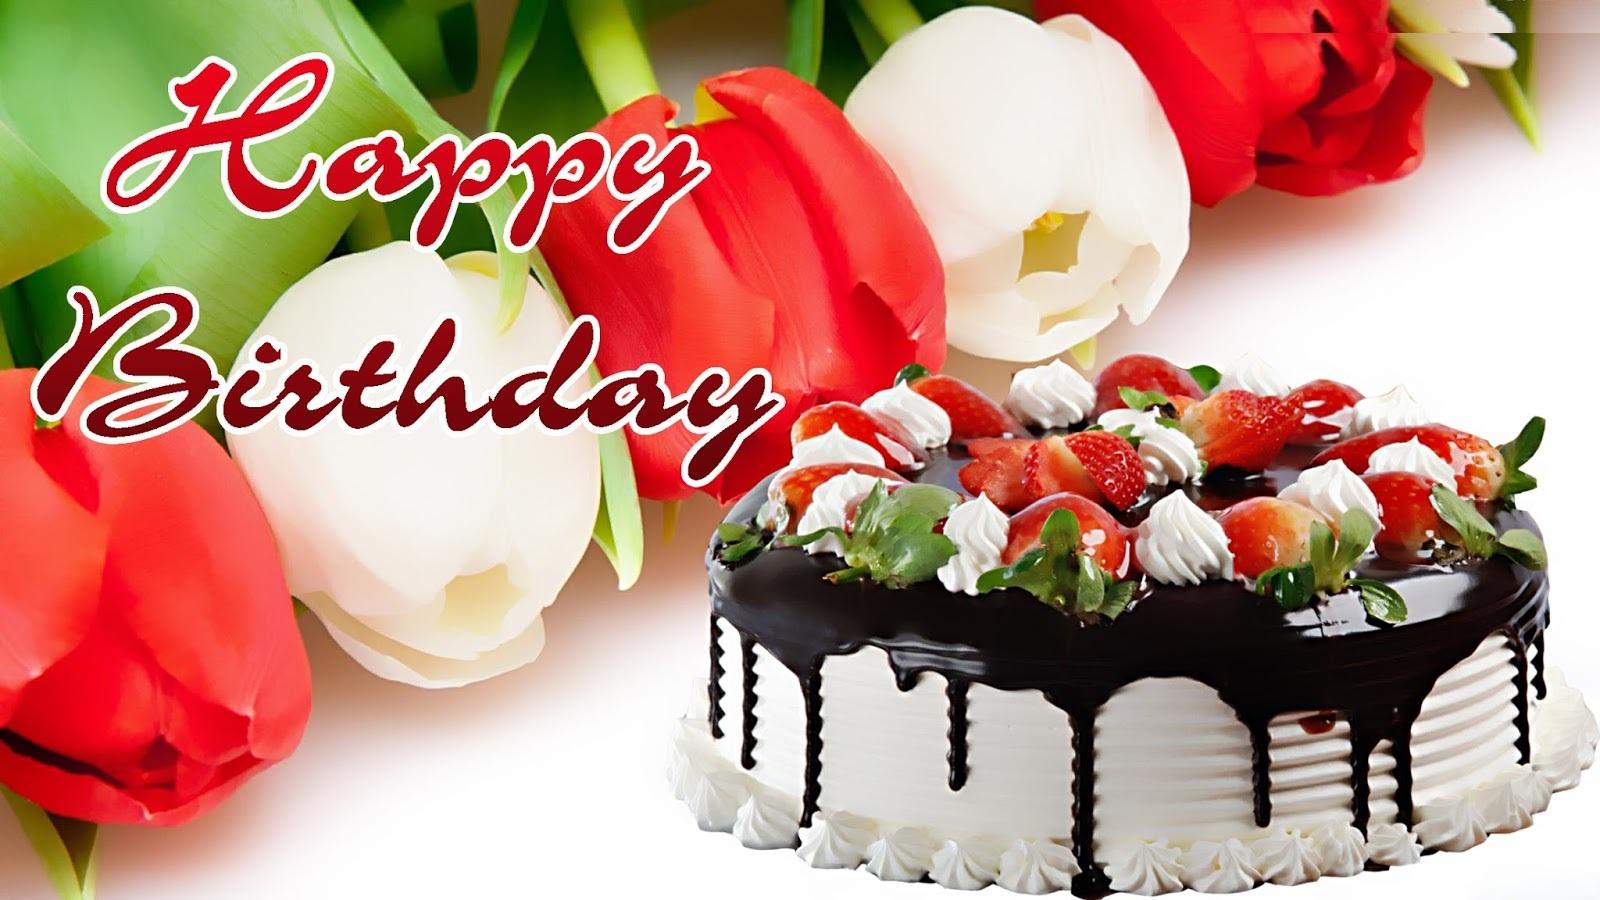 Happy Birthday Love Quotes - Happy B Day Image Download - 1600x900 Wallpaper  